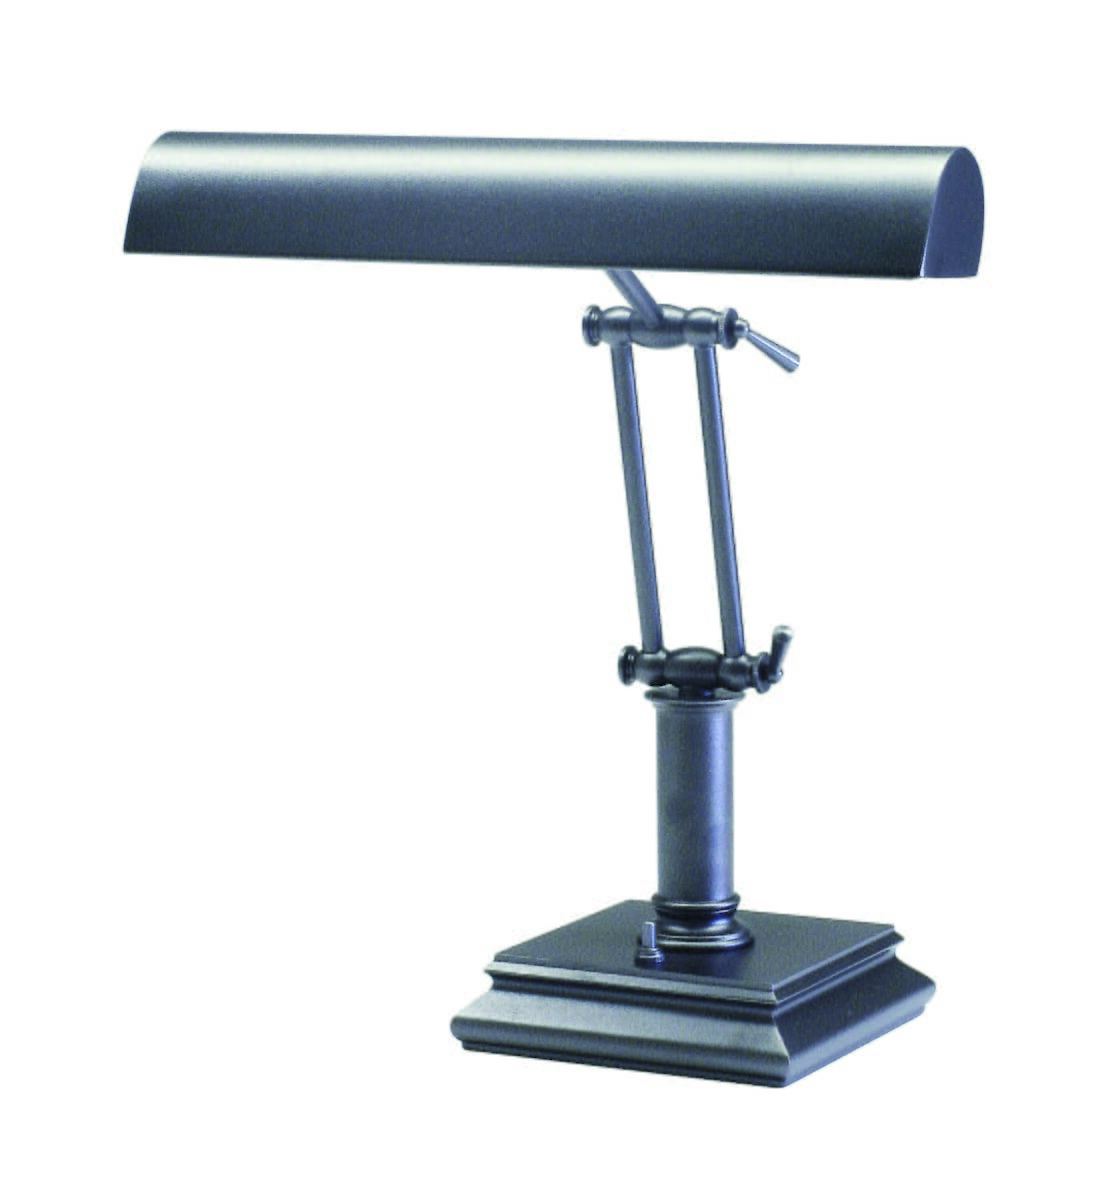 House of Troy 14"" Piano Desk Lamp in Granite Finish -  P14-201-GT